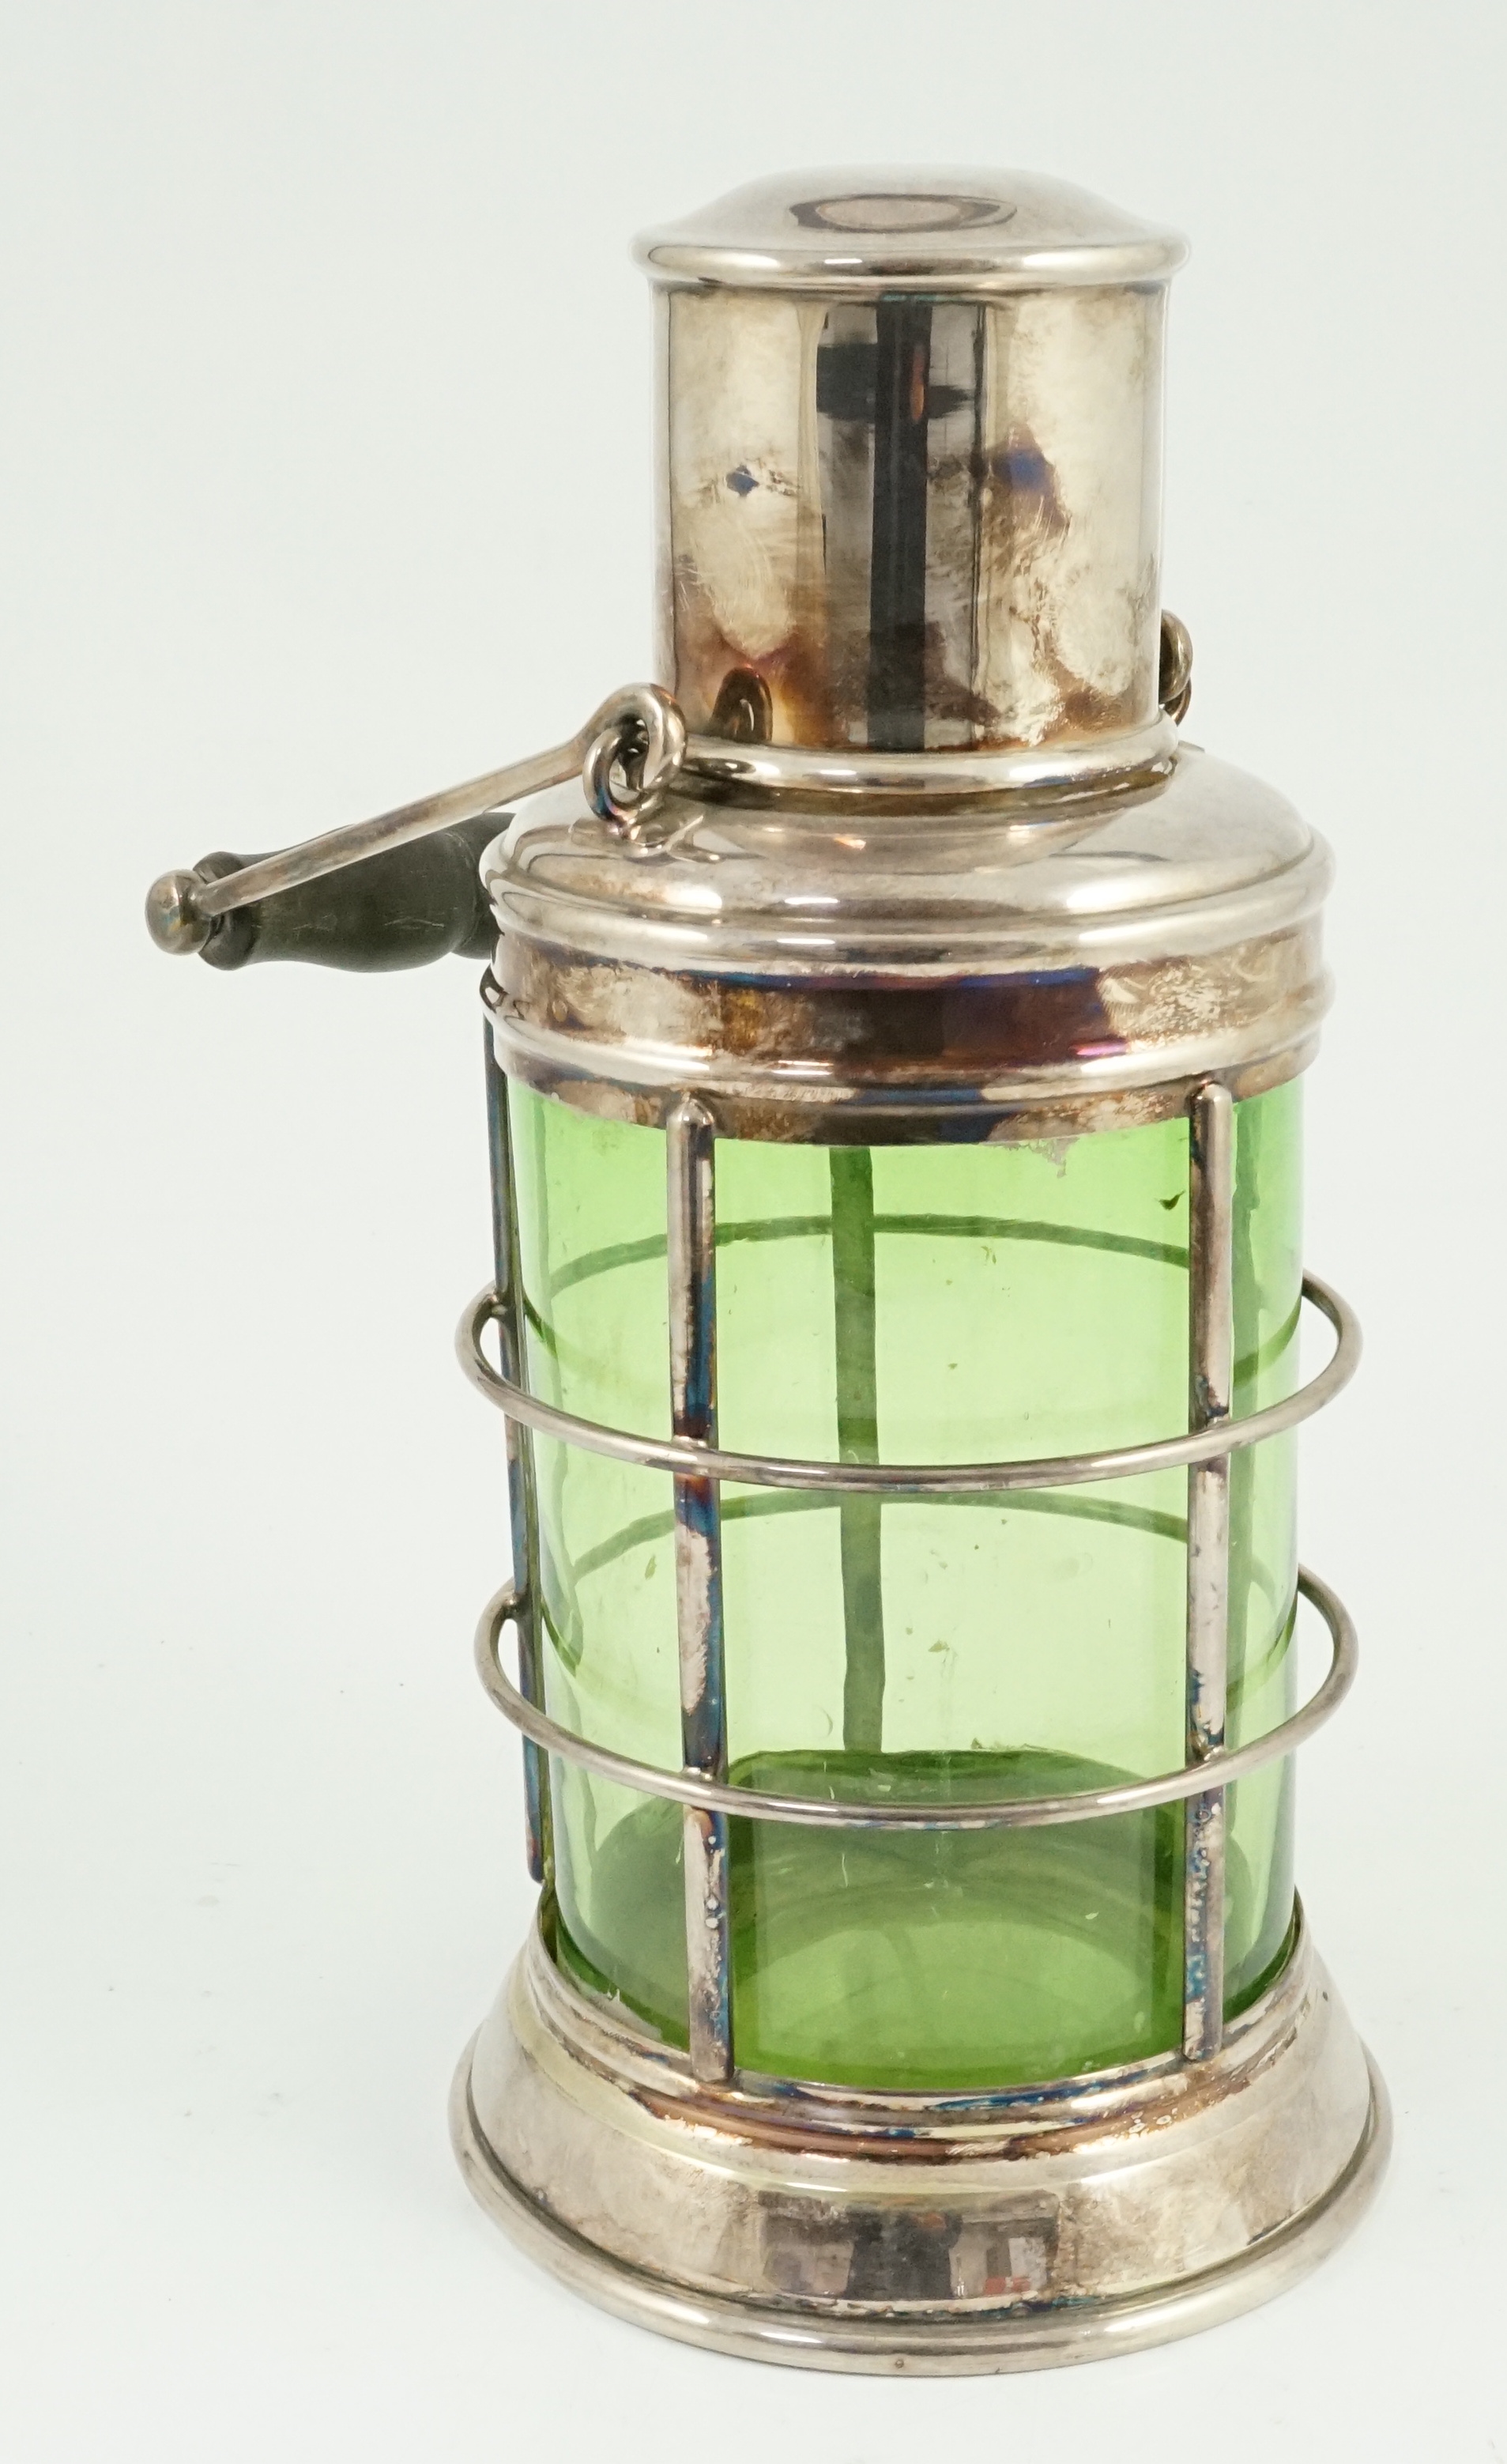 An Asprey & Co. silver plated and green glass novelty cocktail shaker in the form of a lantern